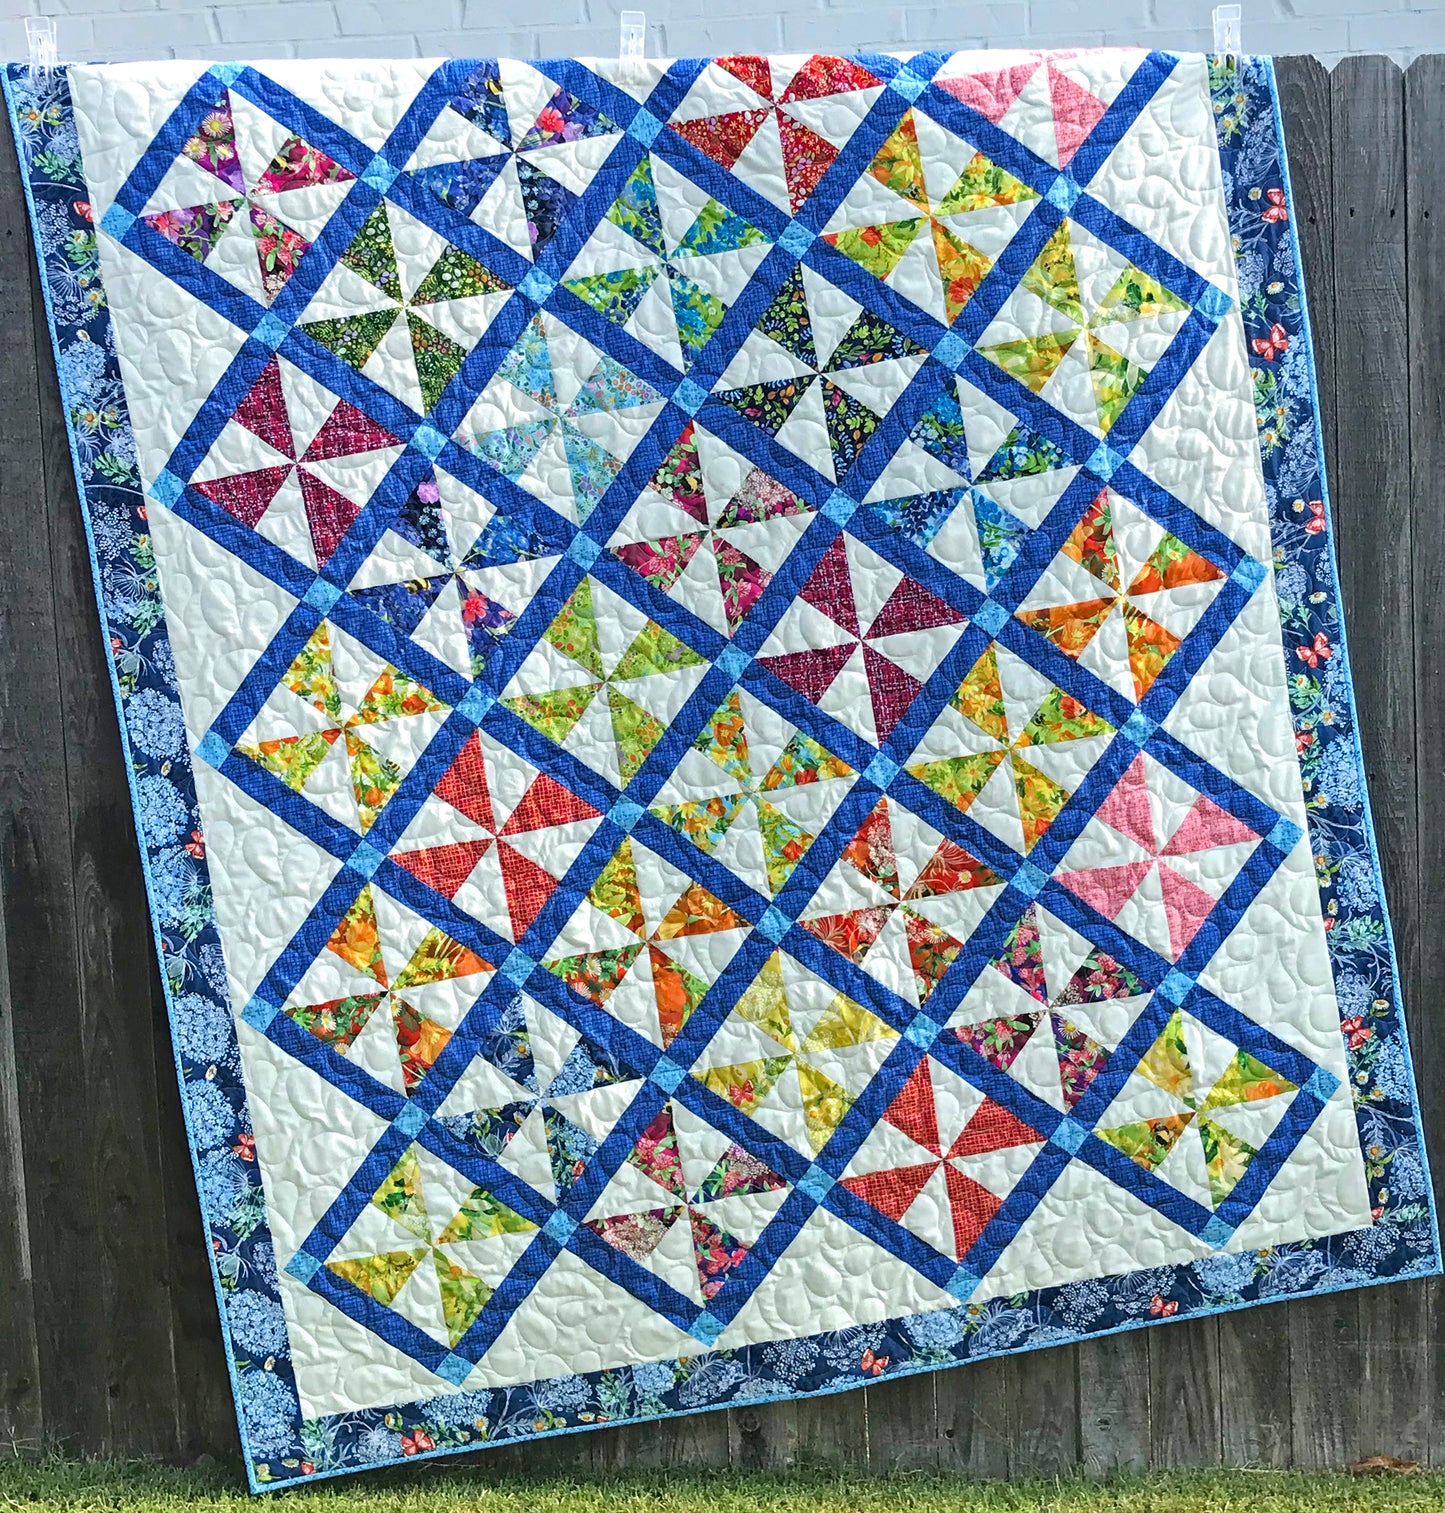 Pinwheel Parade quilt pattern featuring pinwheel blocks set on-point with sashing between the blocks and a floral border. Quilt is shown hanging on a fence.